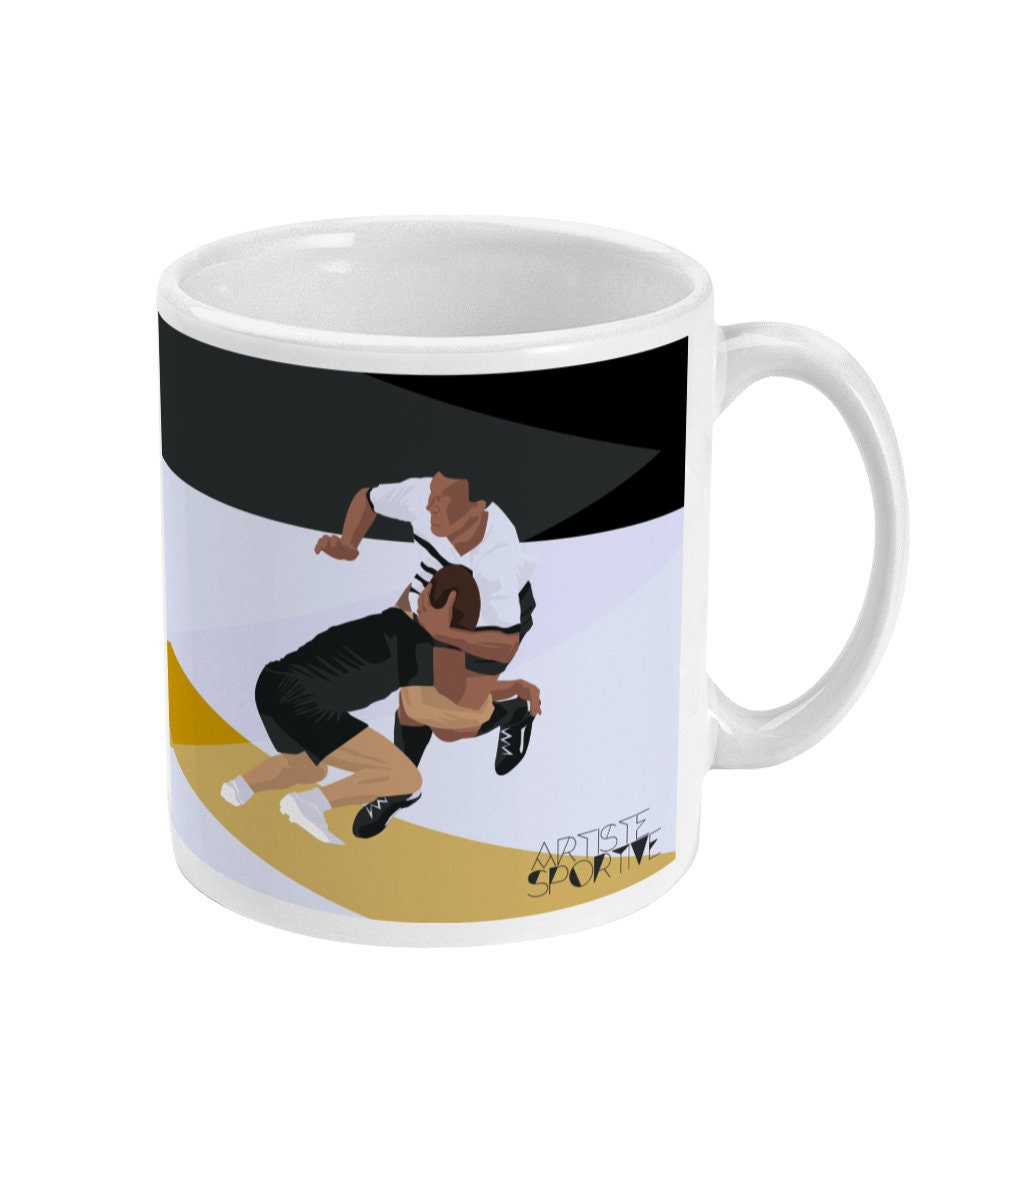 Cup or mug "black and yellow rugby" - Customizable